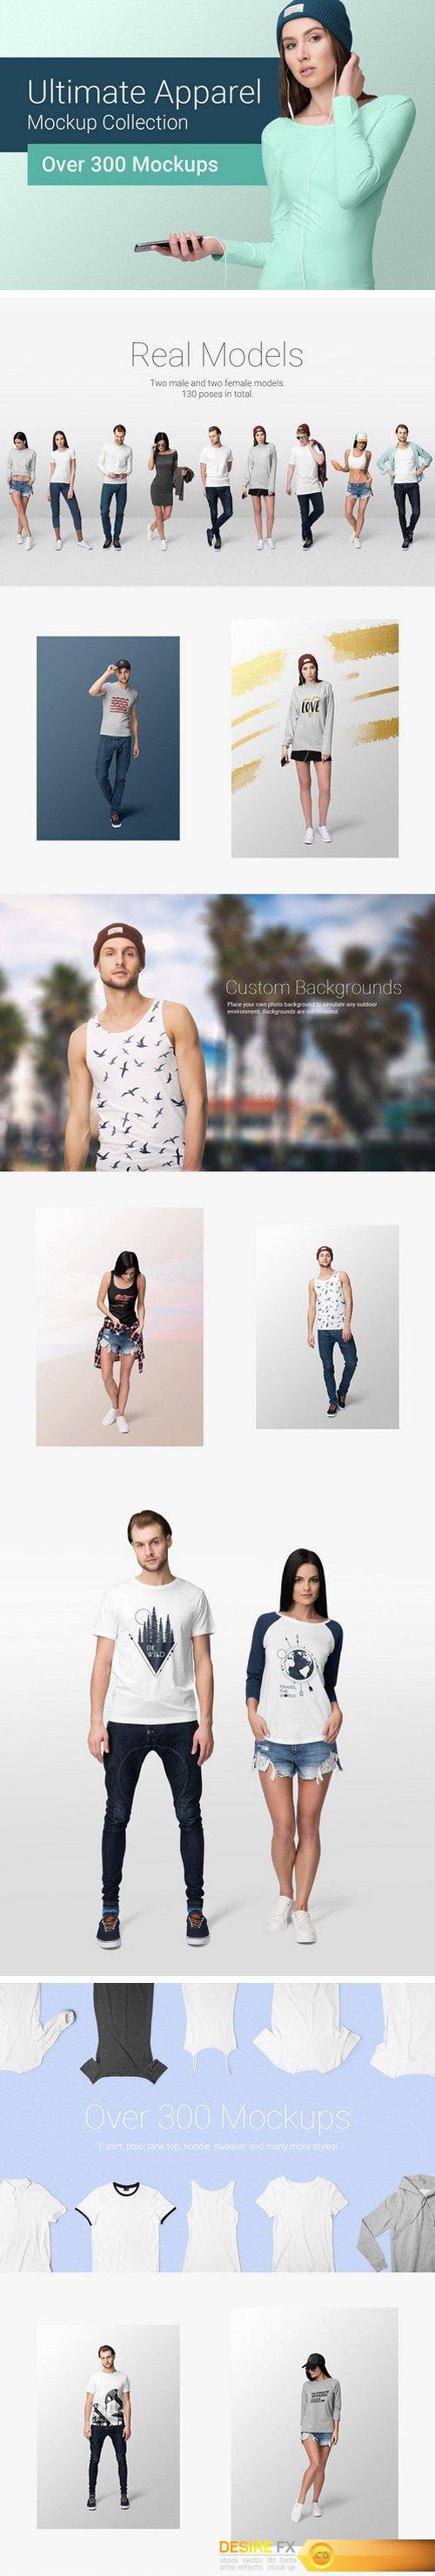 1508705903_ultimate-apparel-mockup-collection-1575498gfx_01